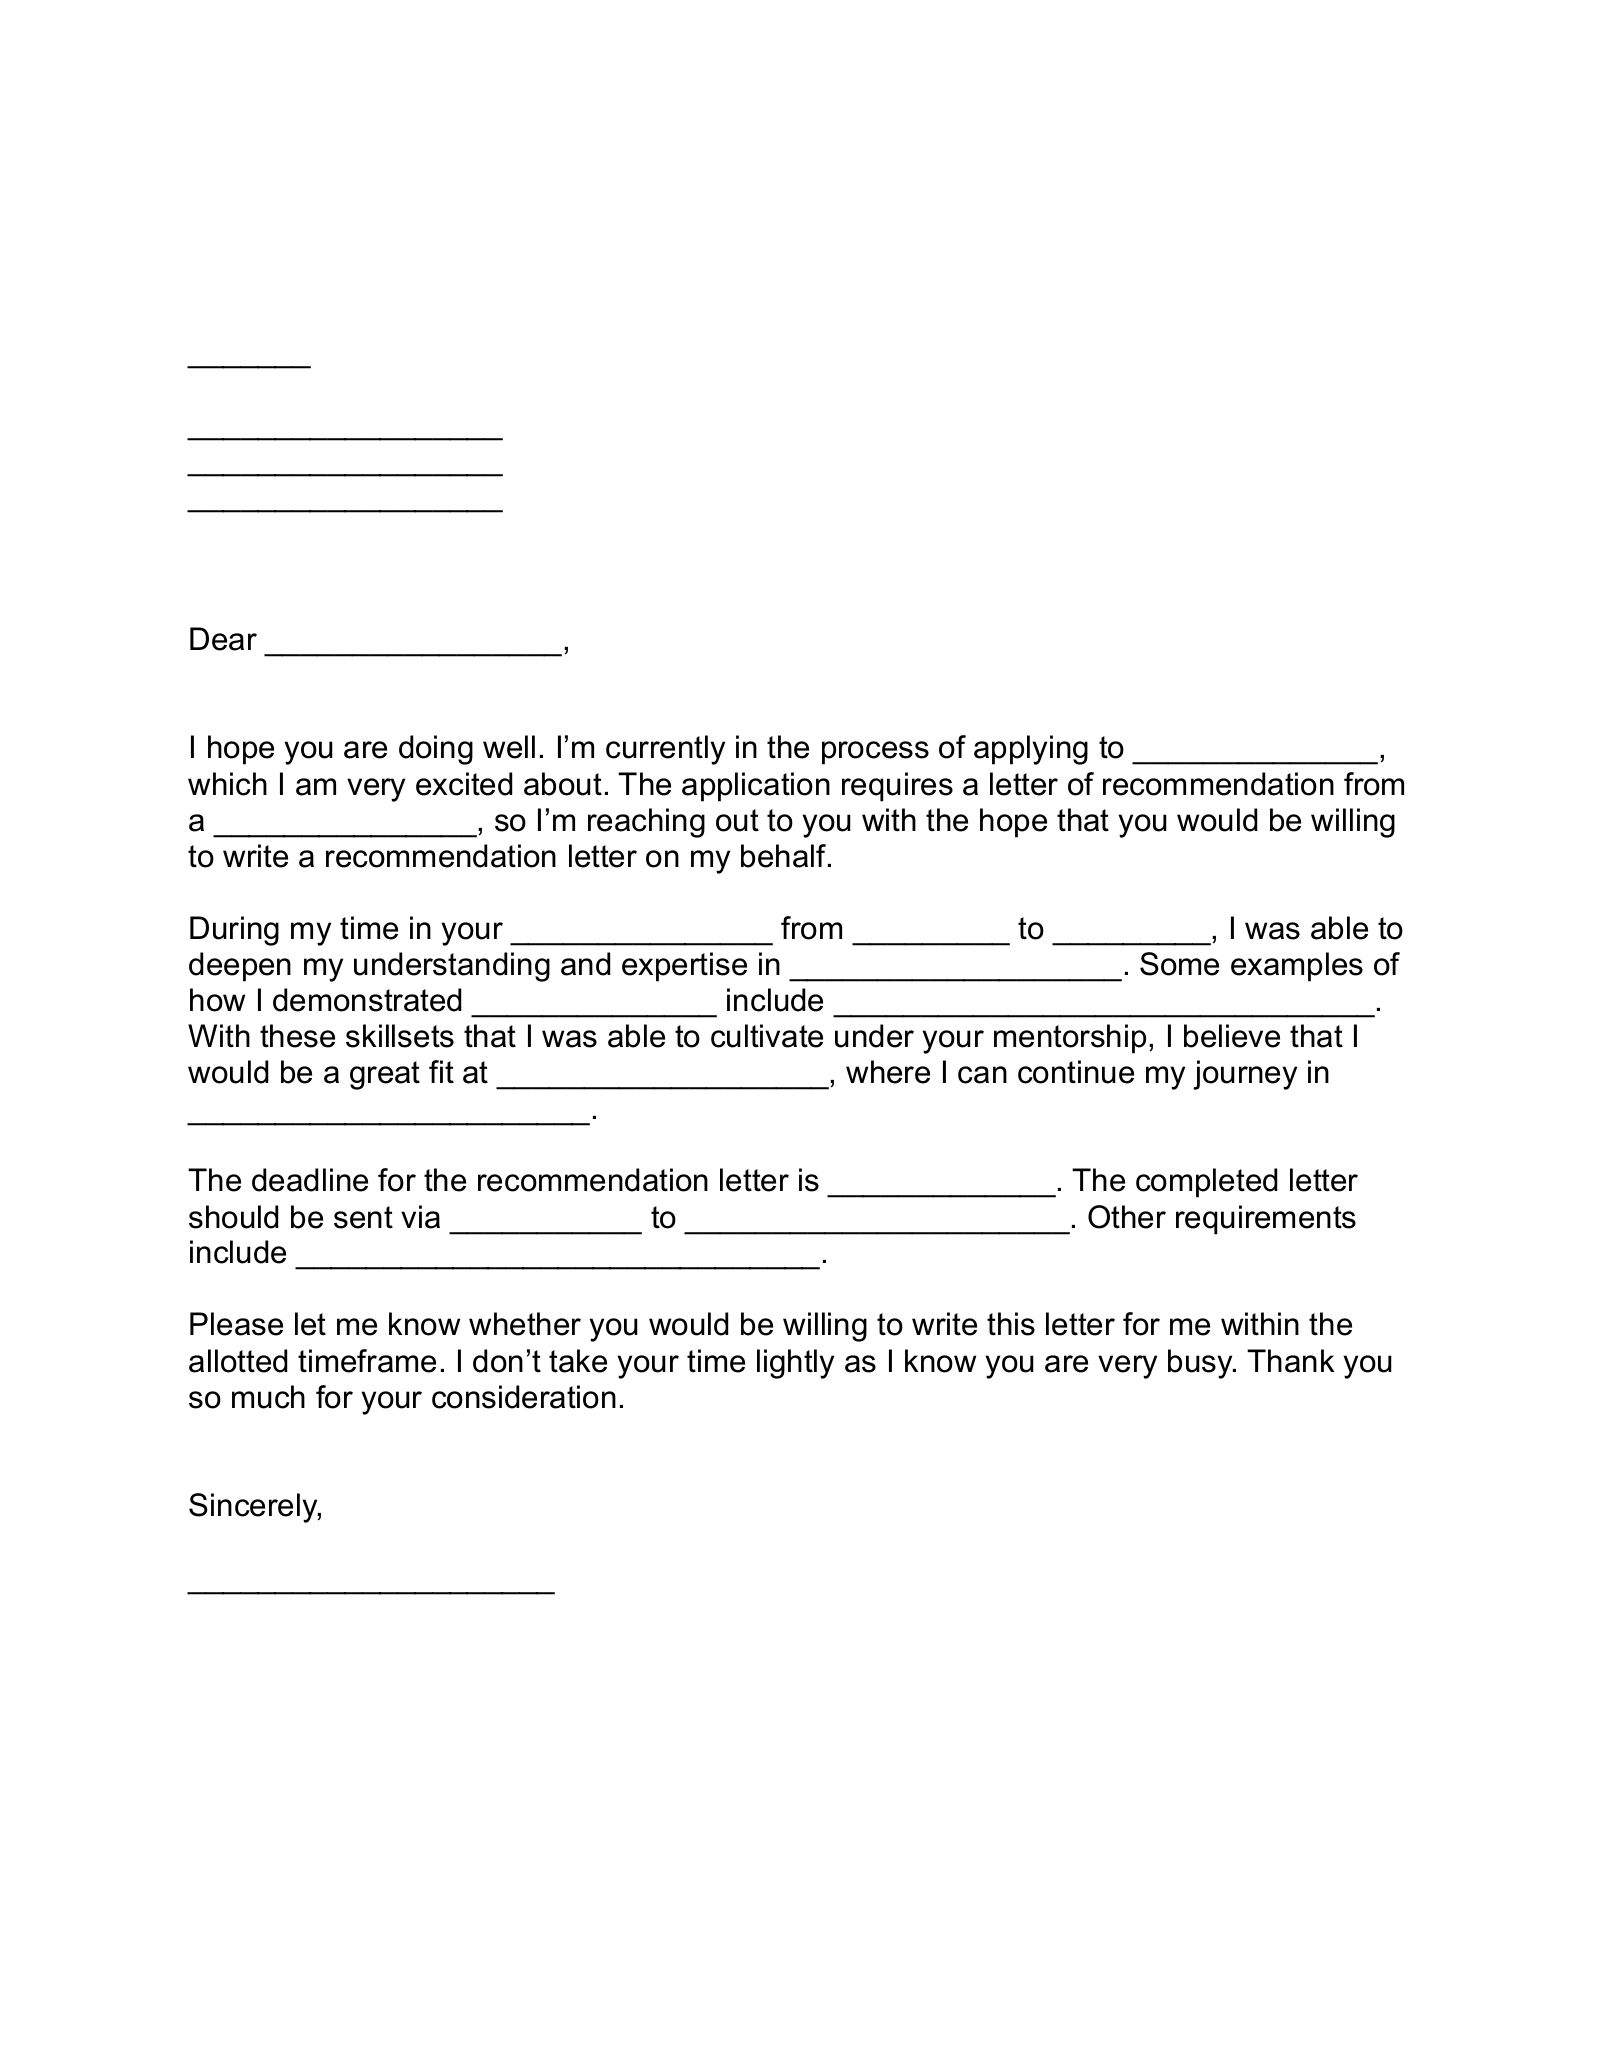 Letter of Recommendation Request